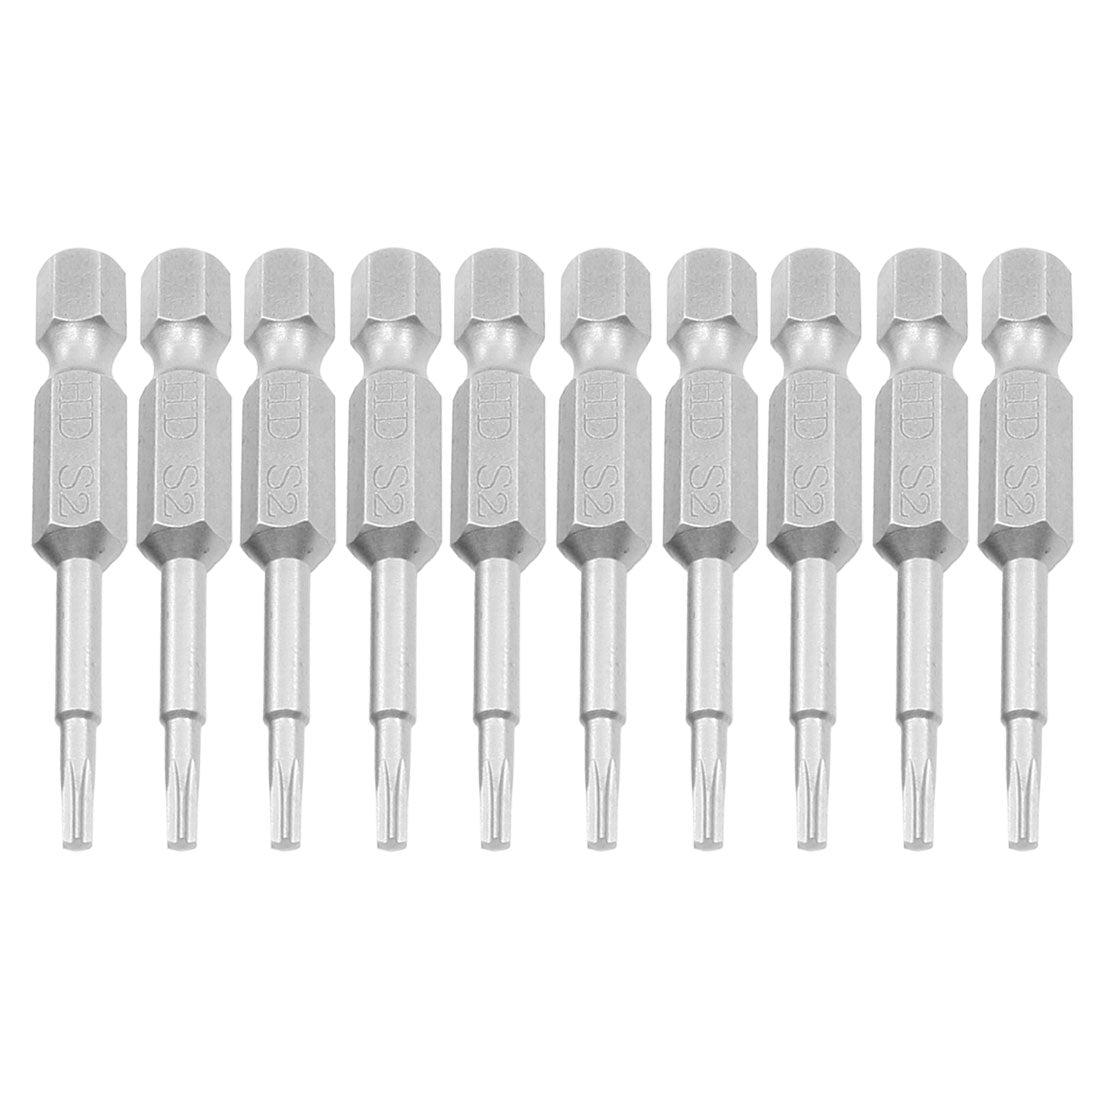 Uxcell Uxcell Replacement T8 Tip 6.35x50mm Magnetic Torx Screwdriver Bits 10 Pcs